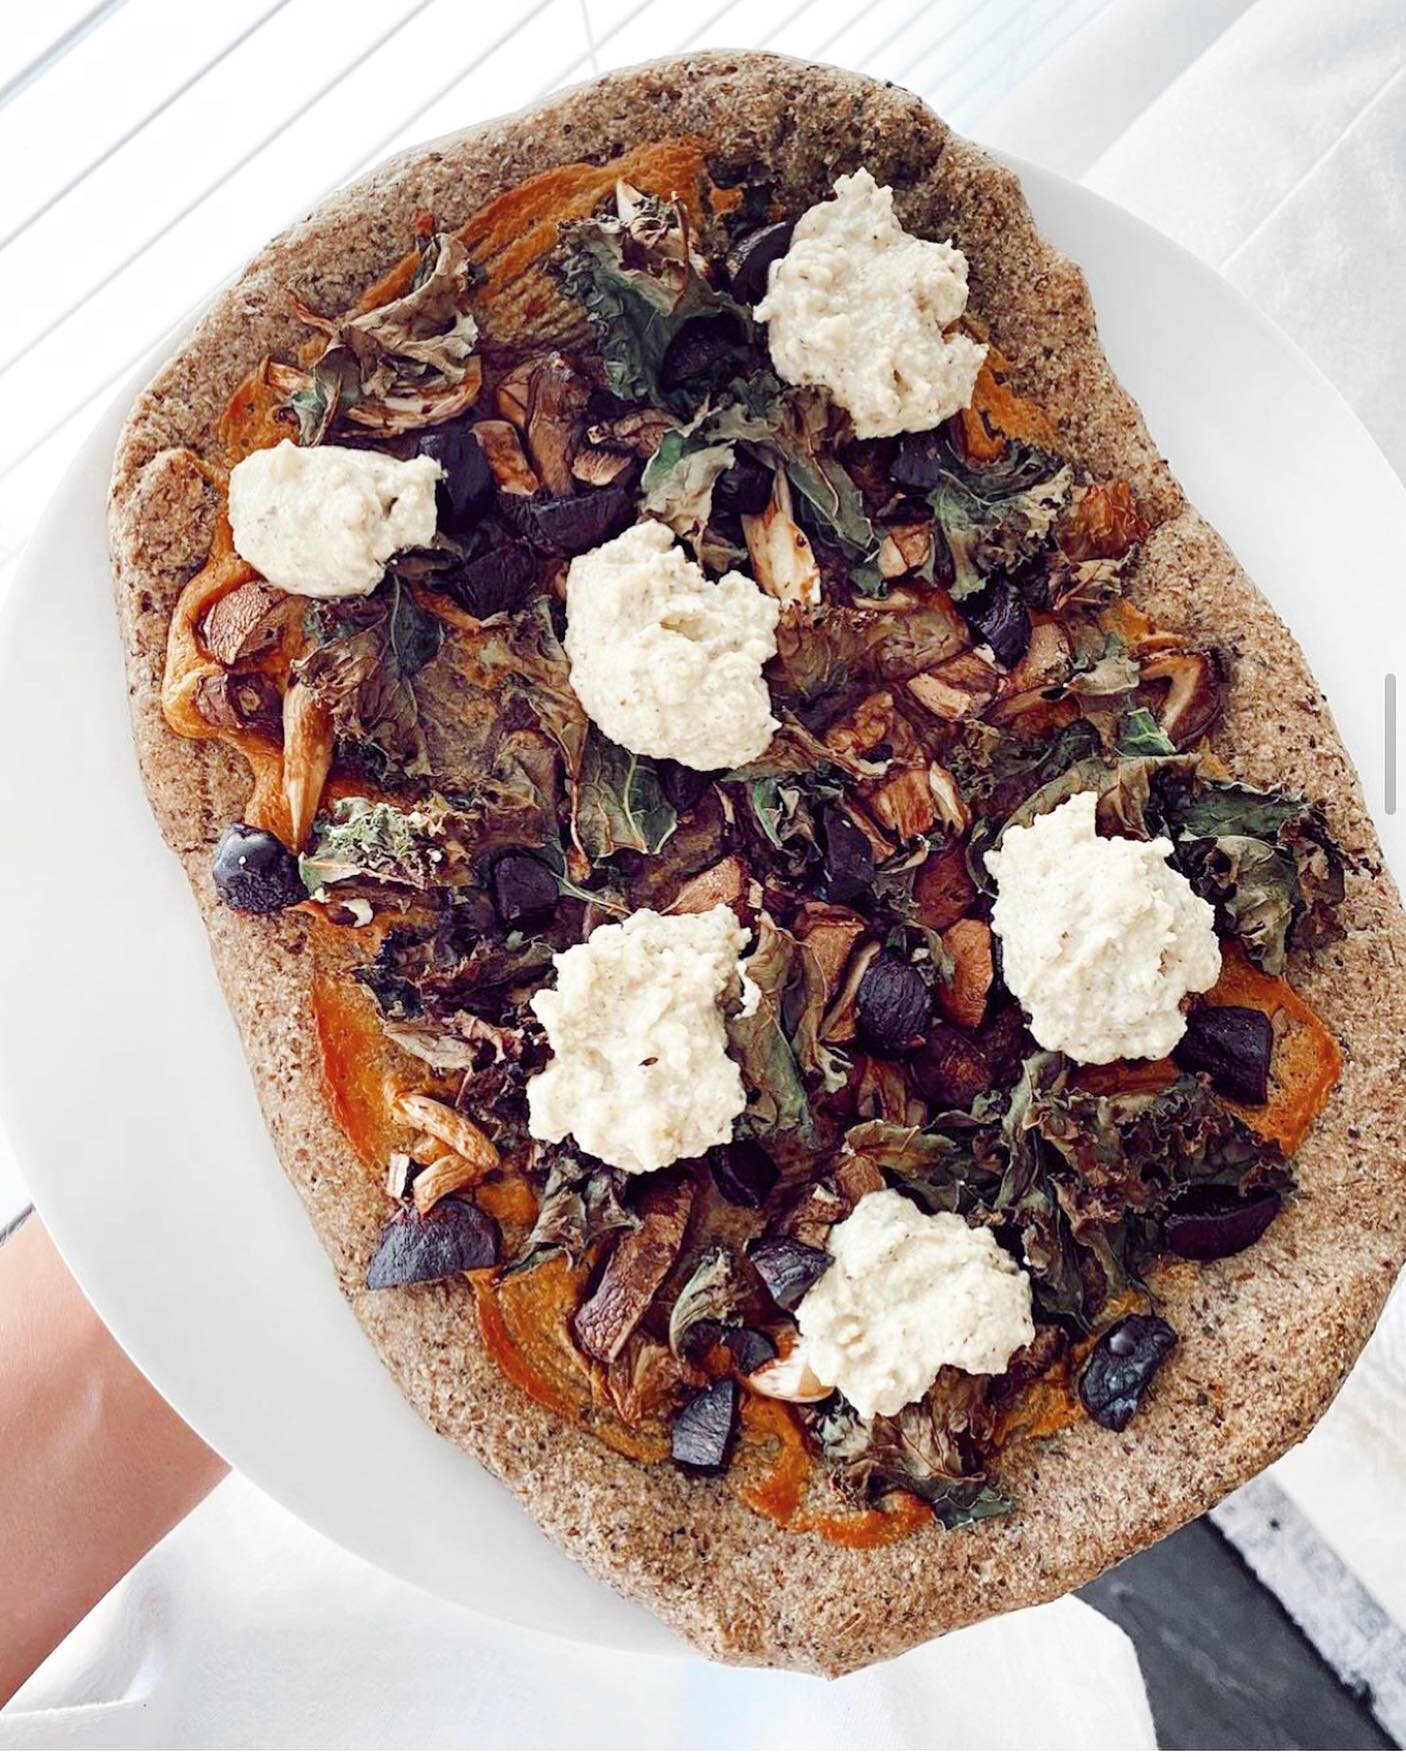 This vegan kale mushroom pizza has us like 🤤🤤🤤 topped with cashew alfredo sauce, oyster and cremini mushrooms, crispy kale and almond ricotta!! We&rsquo;ll just be over here dreaming of this masterpiece by our Stellar Baker: @baileyjst #StellarEat